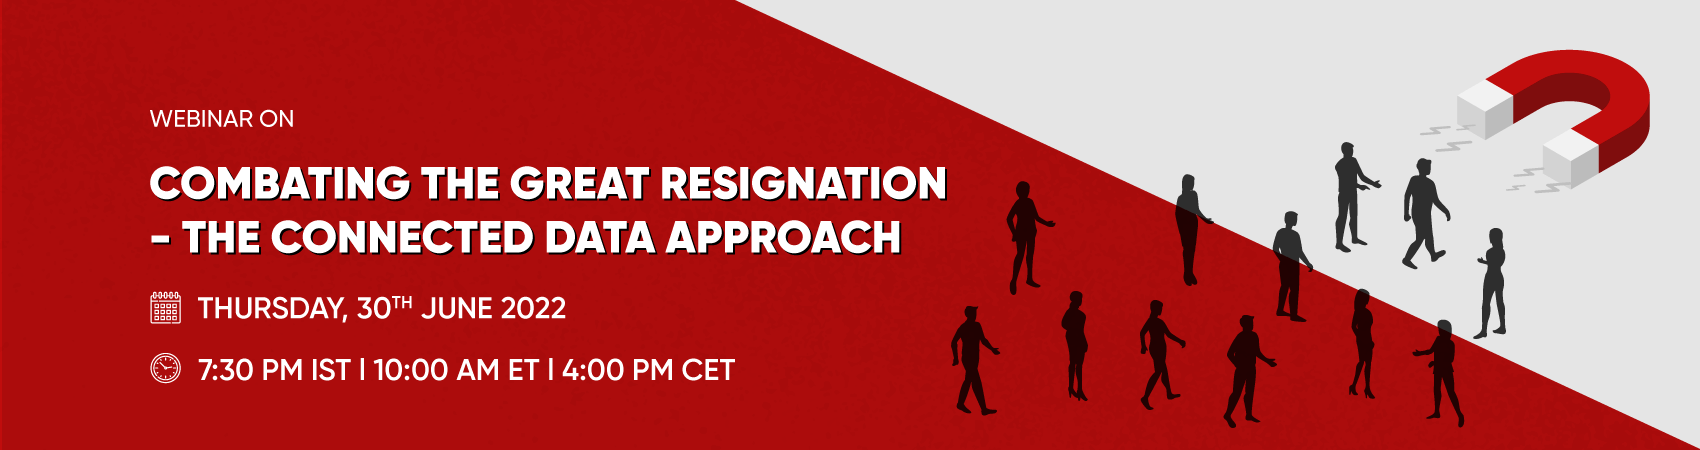 Combating-the-Great-Resignation-The-Connected-Data-Approach-Webinar